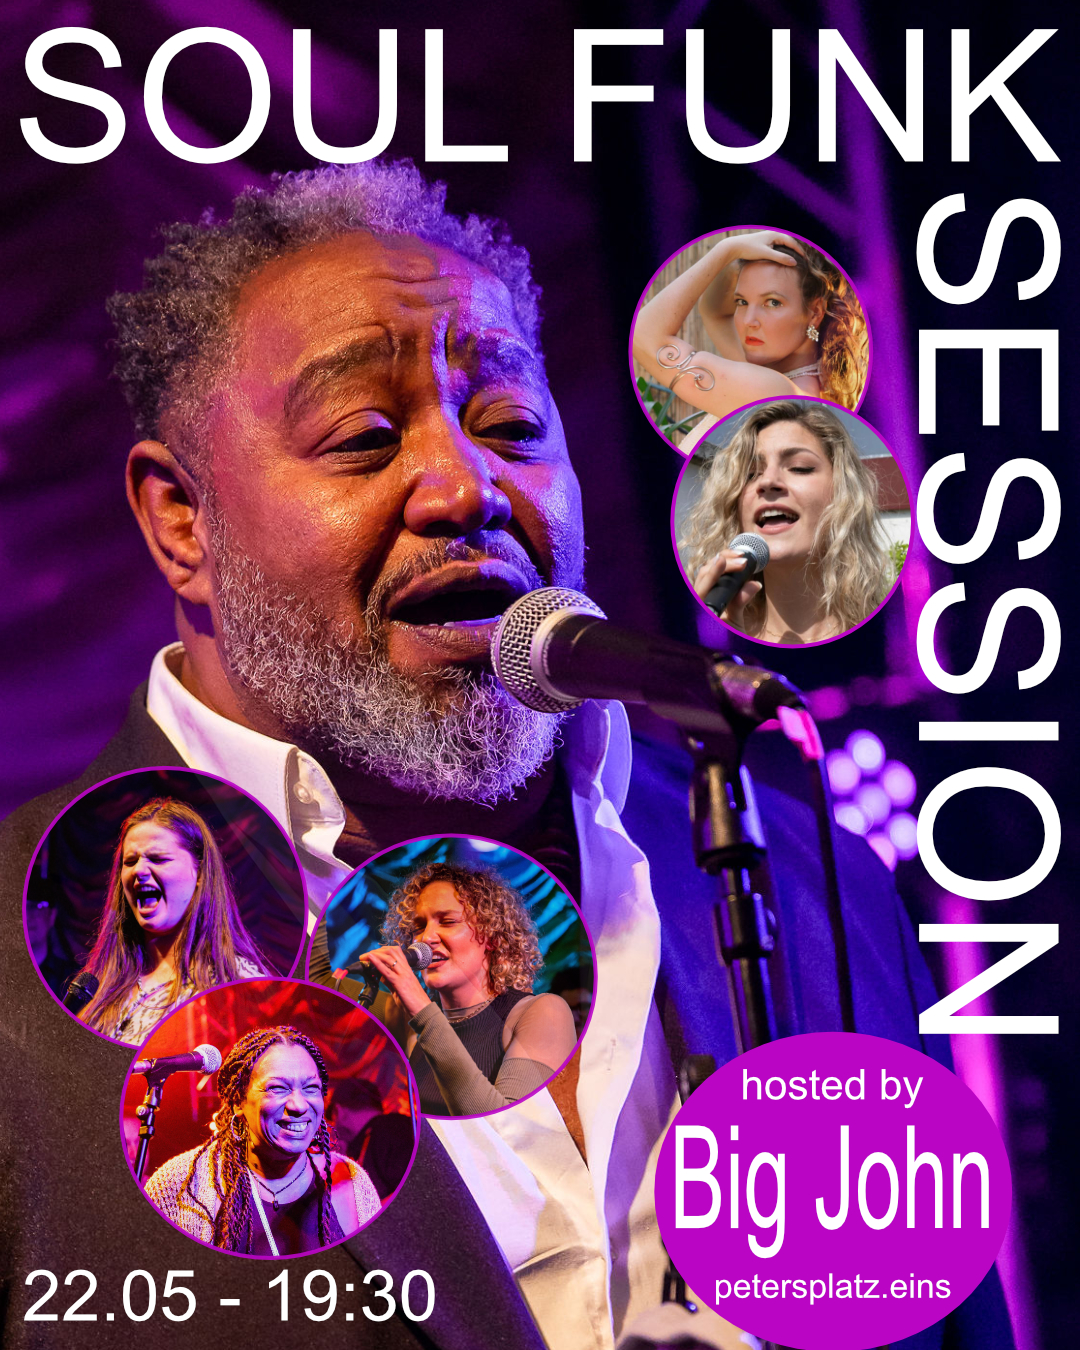 Soul Funk Session hosted by Big John am 22. May 2024 @ petersplatz.eins.